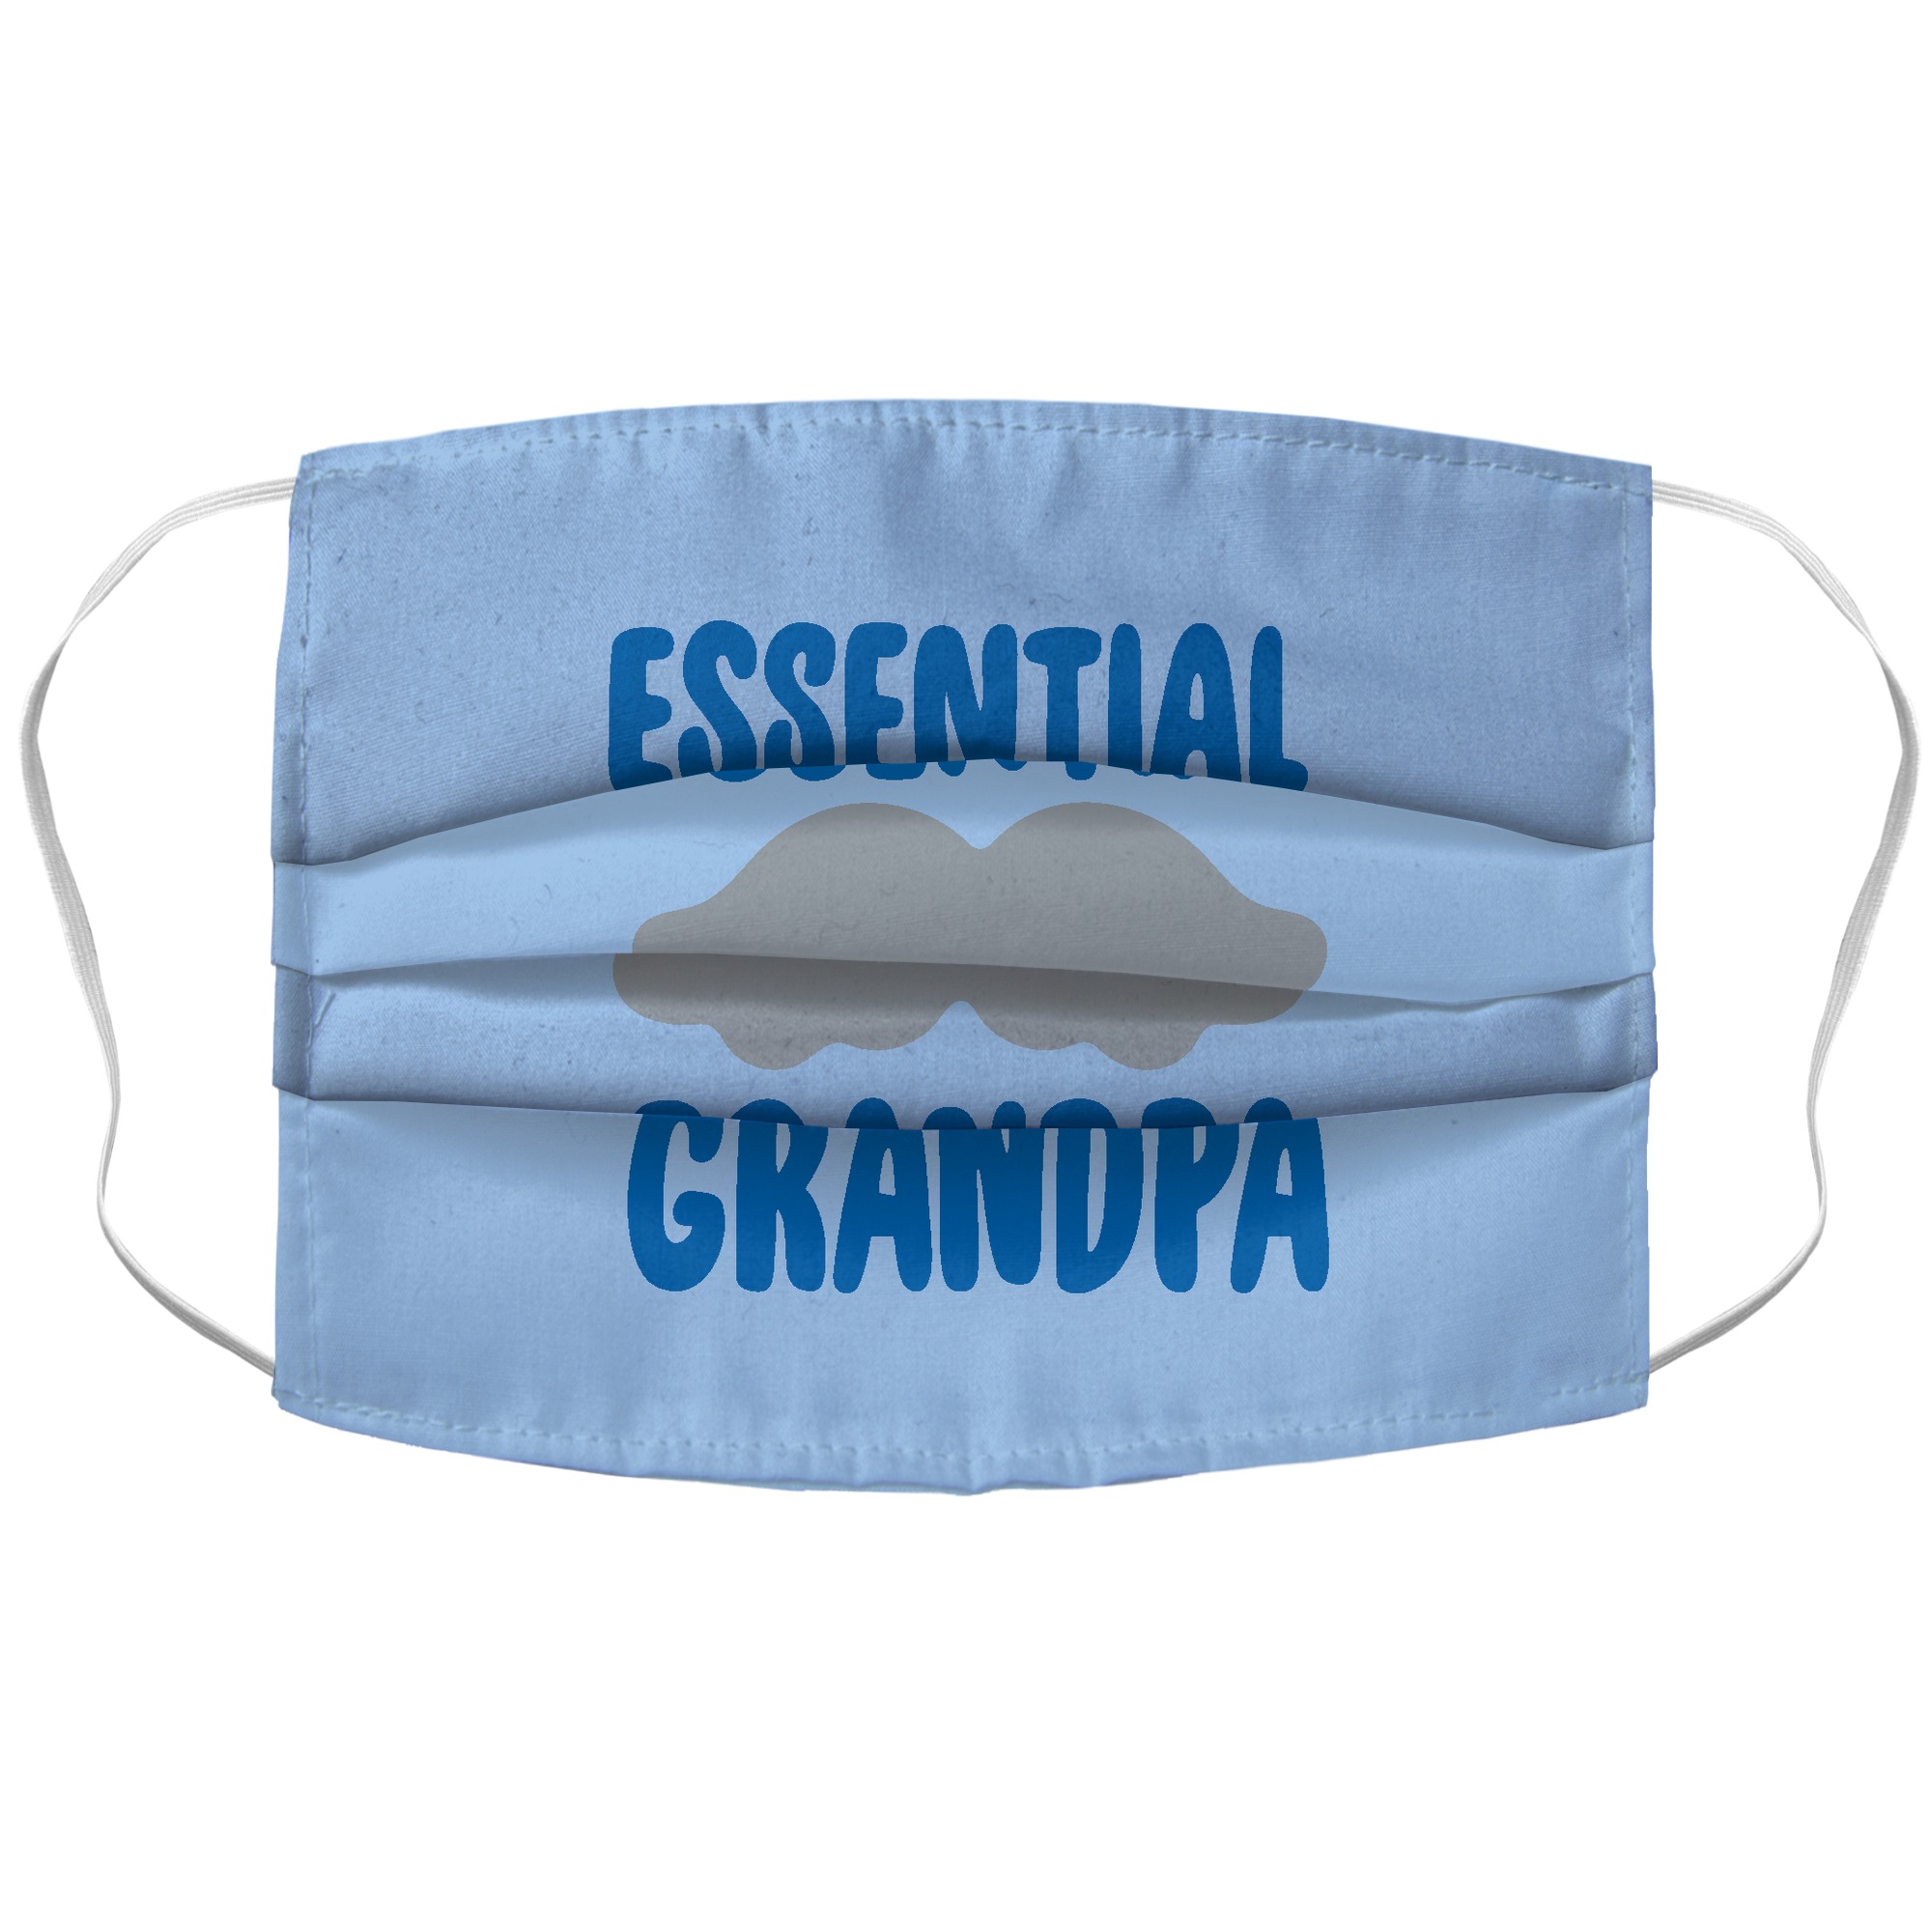 Download Essential Grandpa Accordion Face Mask Lookhuman